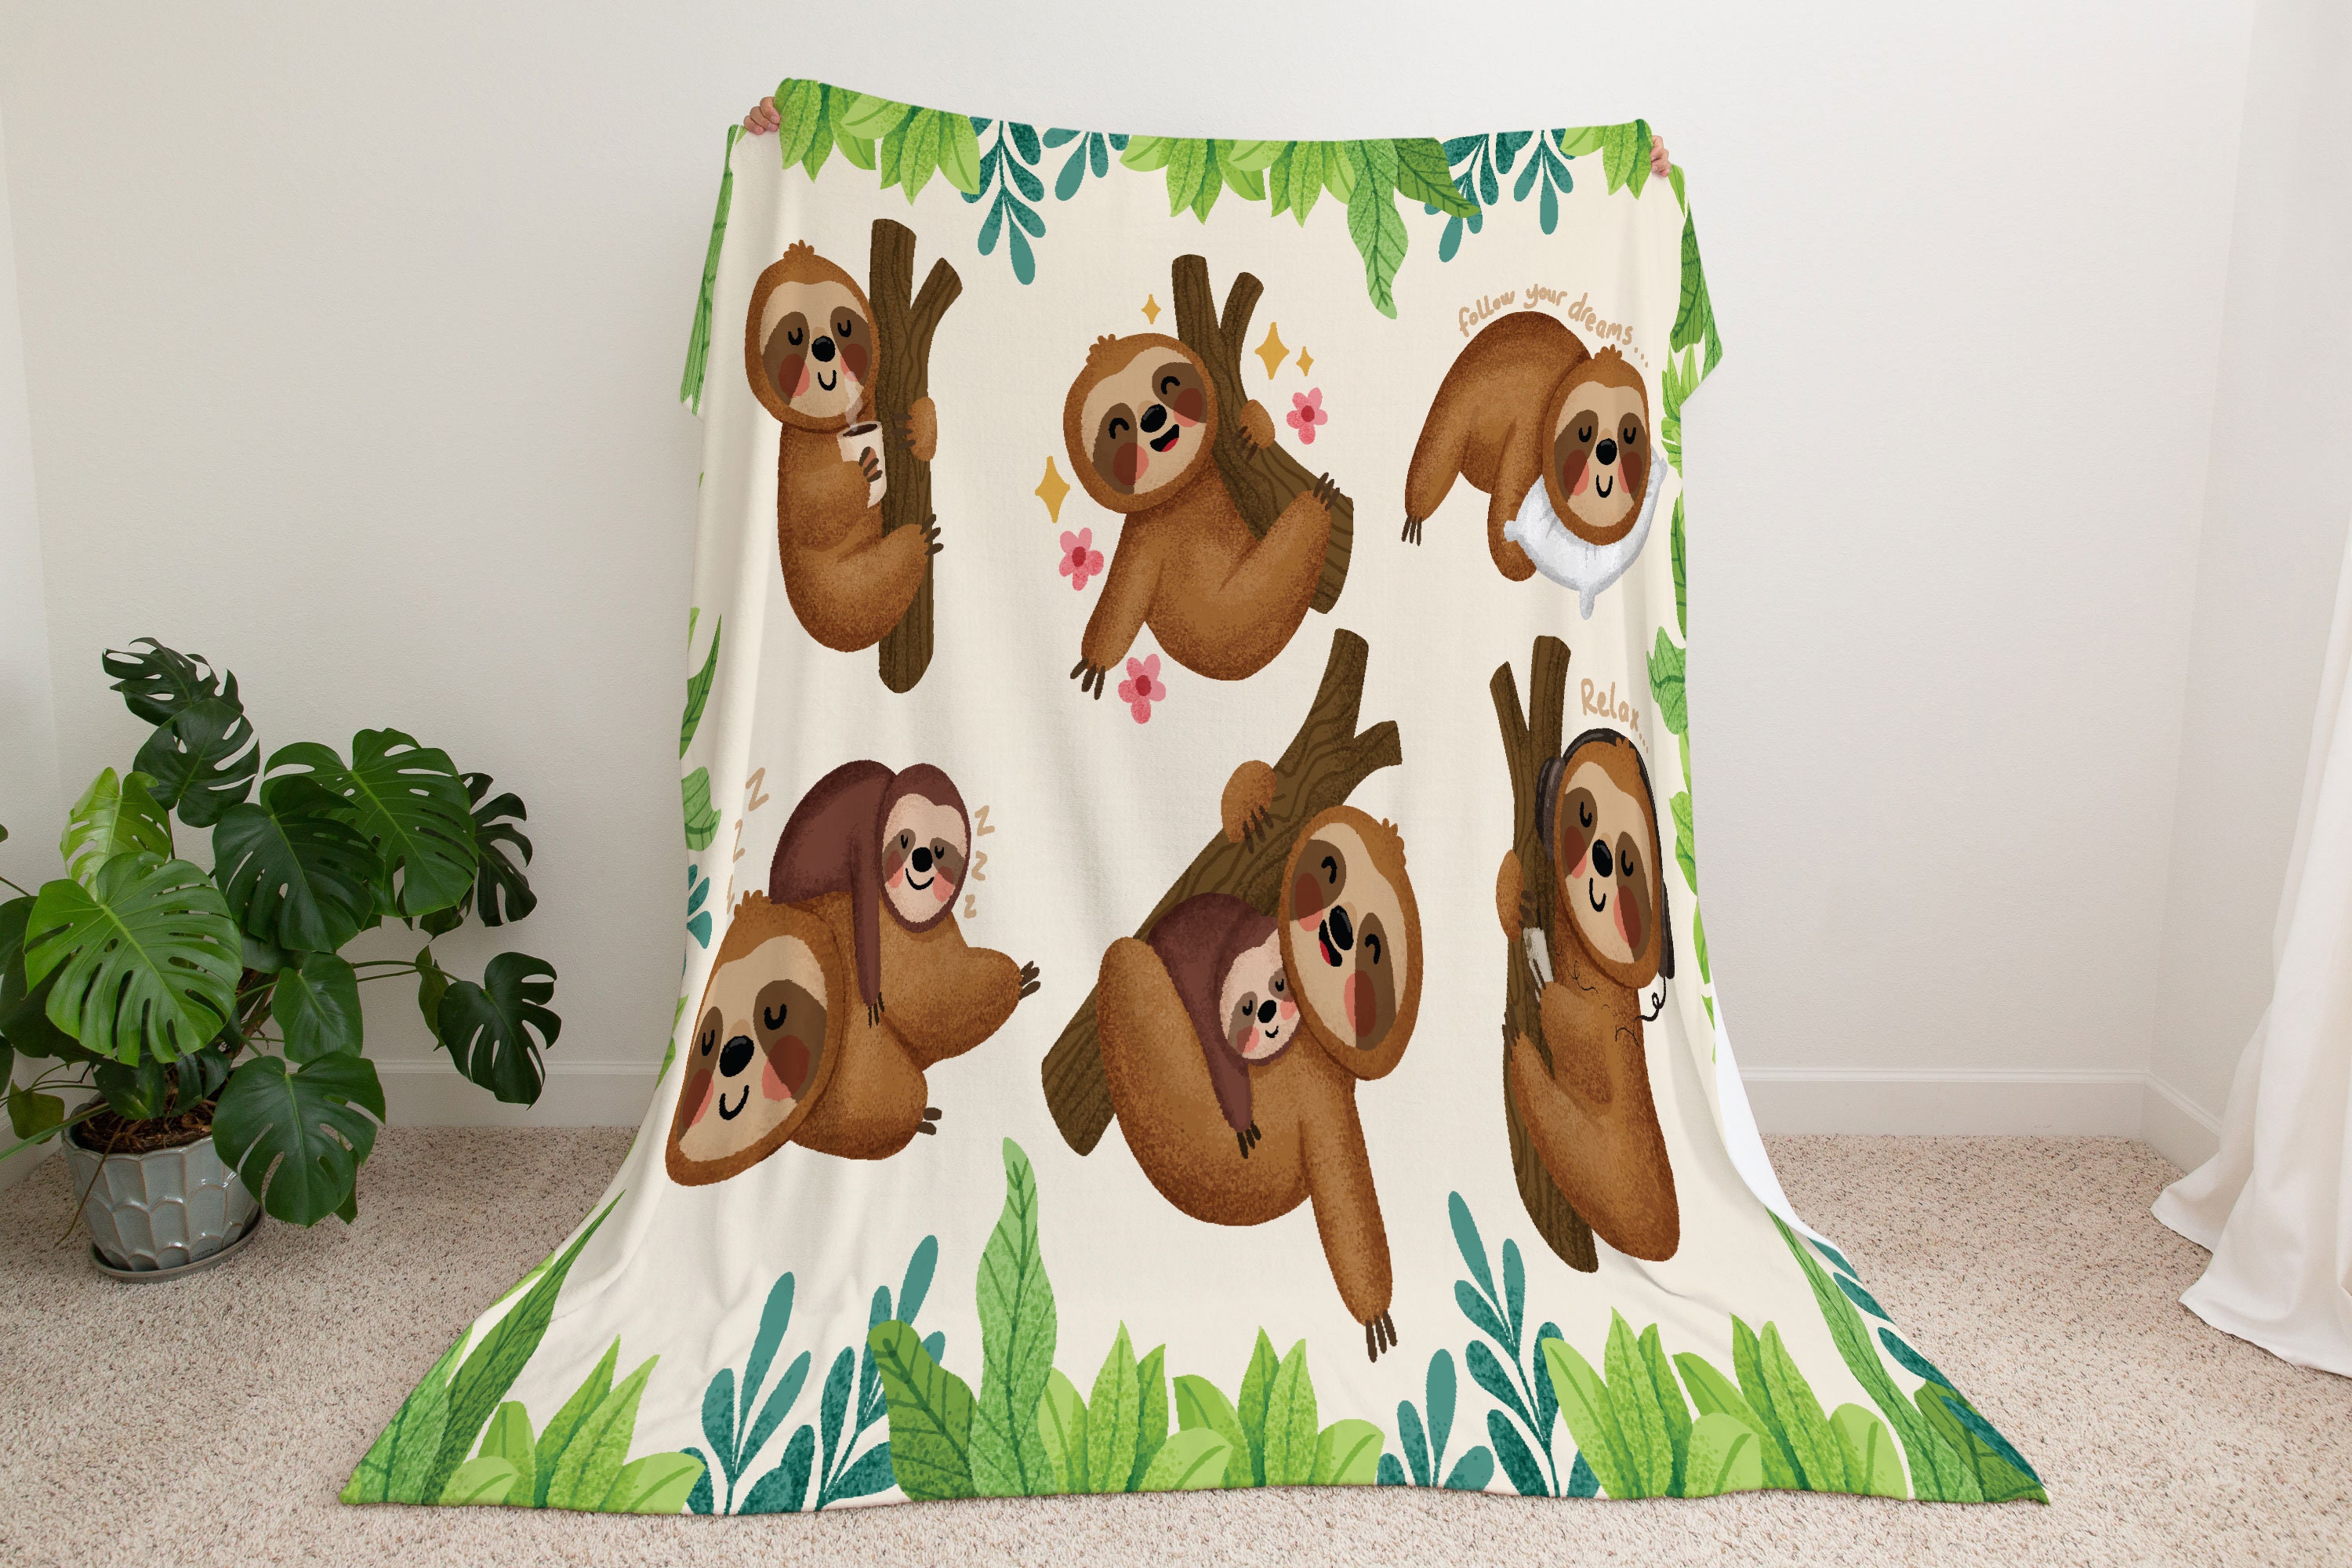 No Sew Blanket Kit - Sloth - Personalization Available